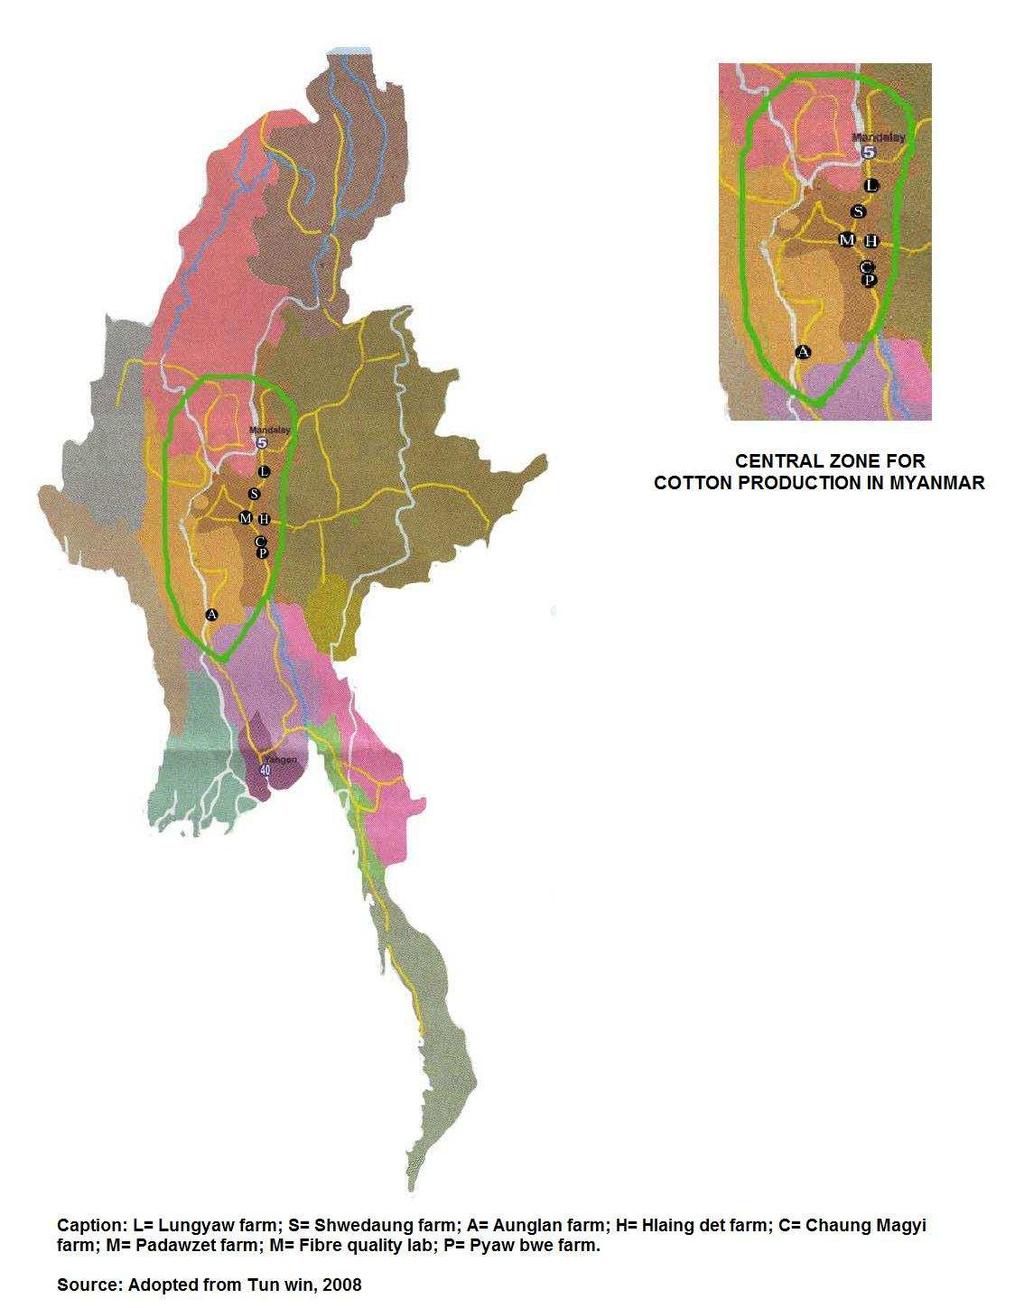 major cotton growing regions including Western Bago, Mandalay, Magwe and